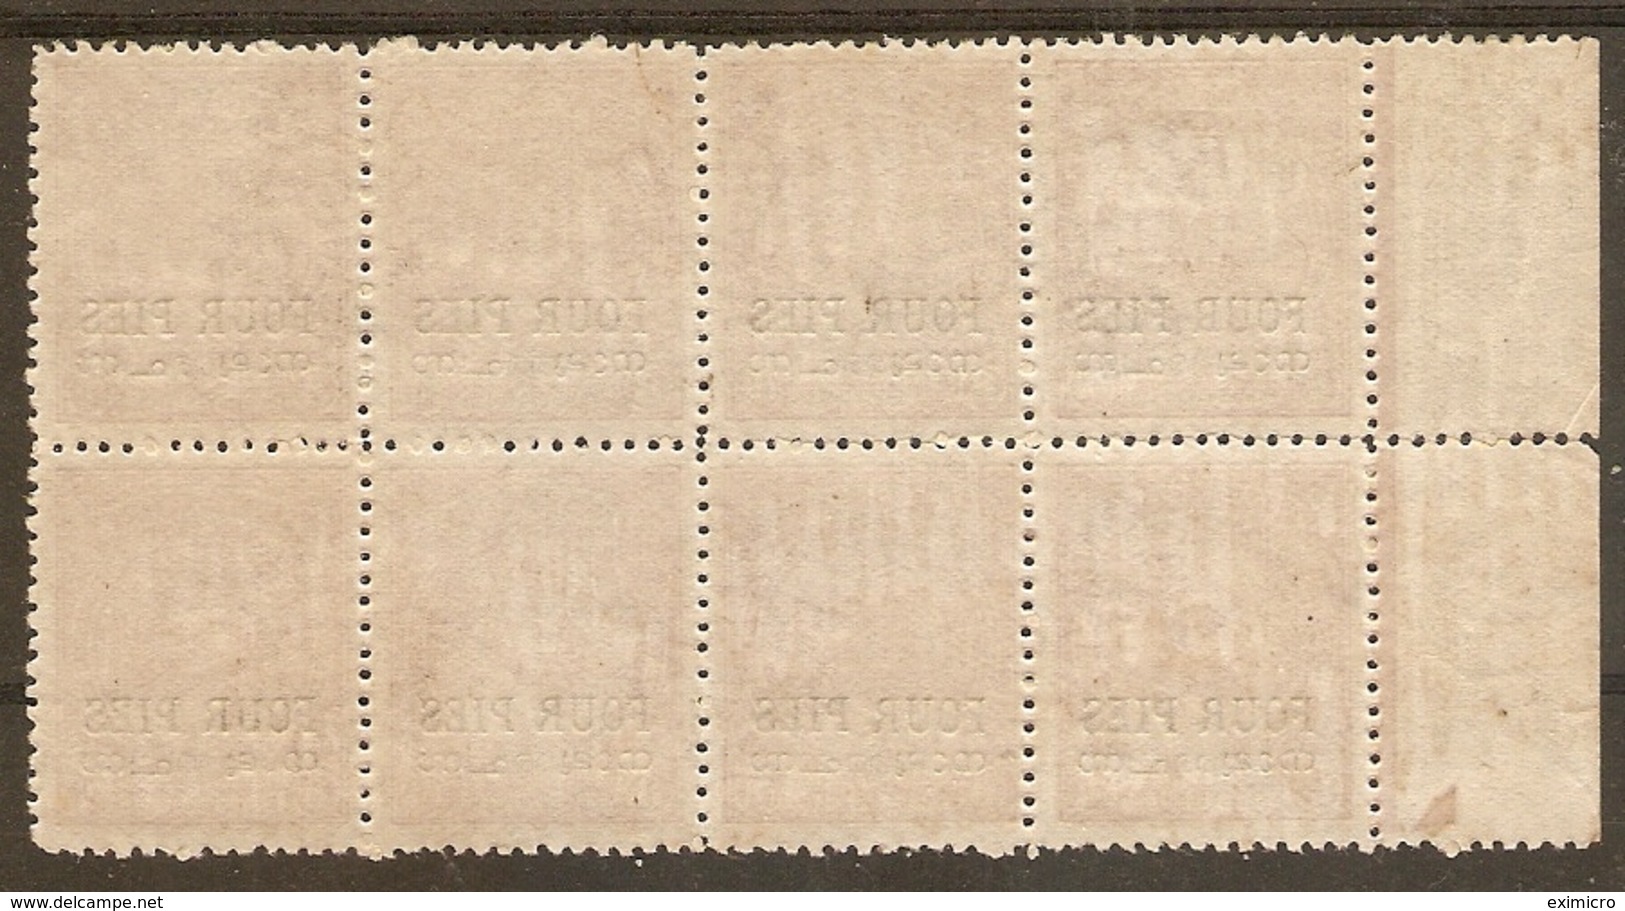 INDIA - TRAVANCORE-COCHIN 1949 4p On 8ca PERF 12 SG 2d  MINT NEVER HINGED MARGINAL BLOCK OF 8 INCLUDING VARIETY - Travancore-Cochin